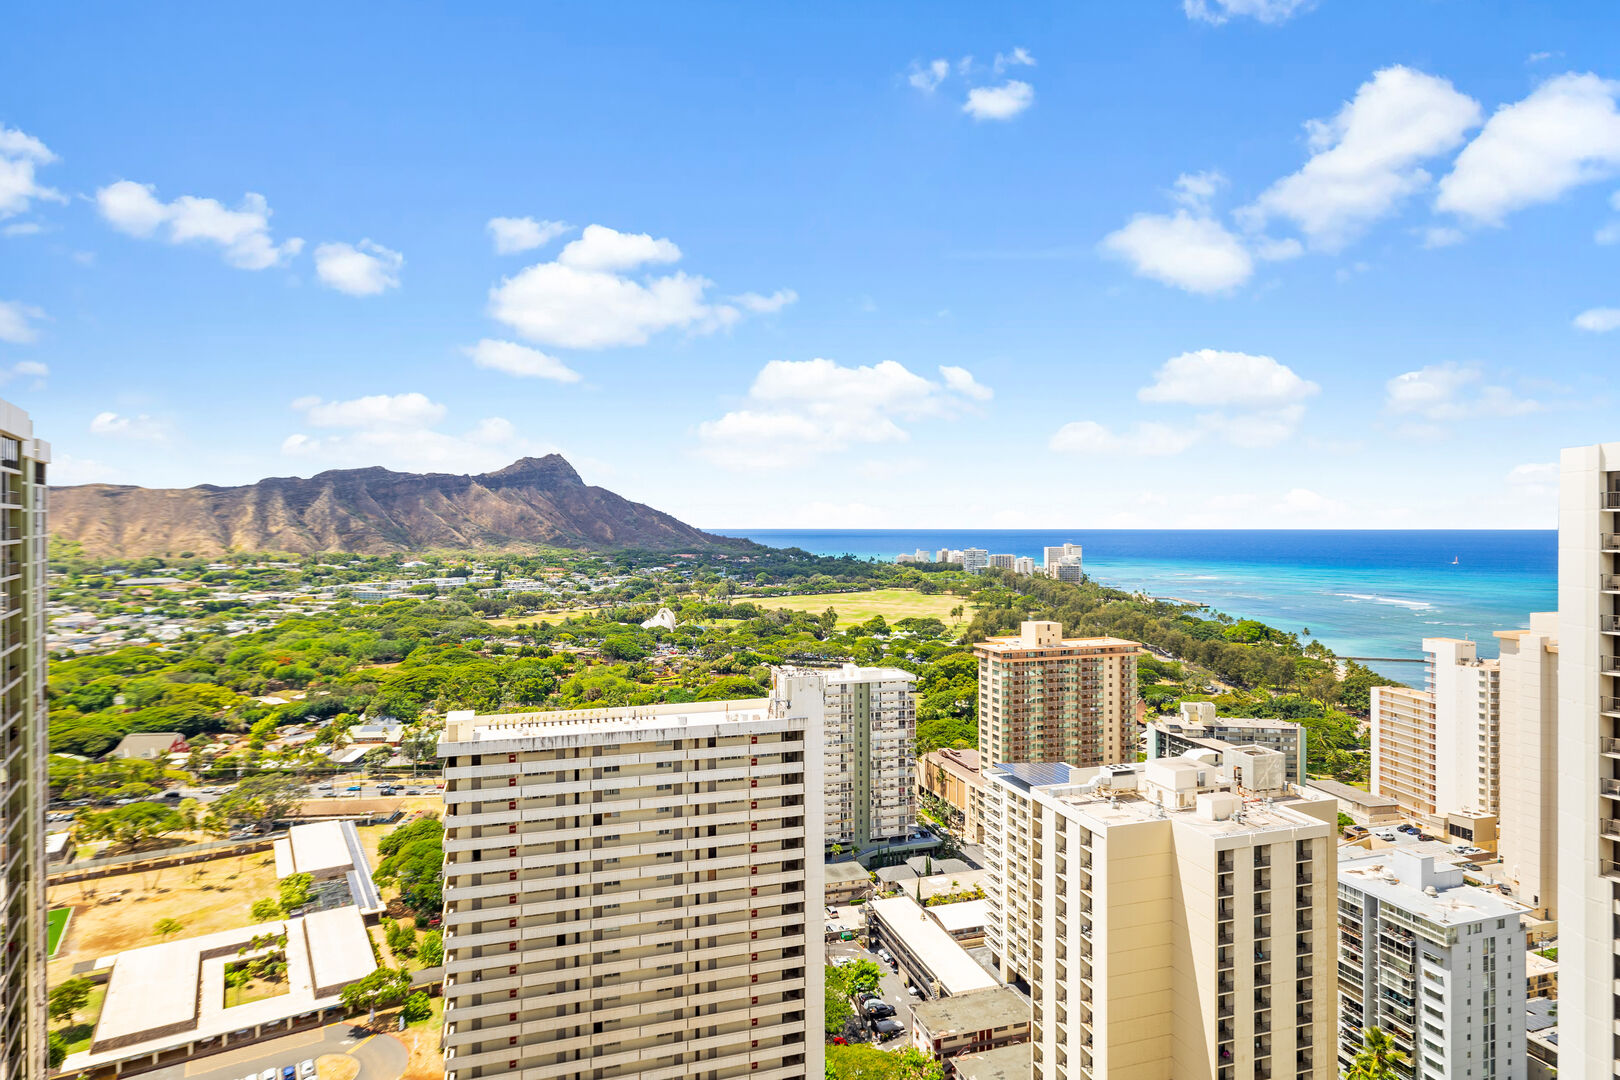 Breathtaking Diamond head and ocean views from your private lanai!